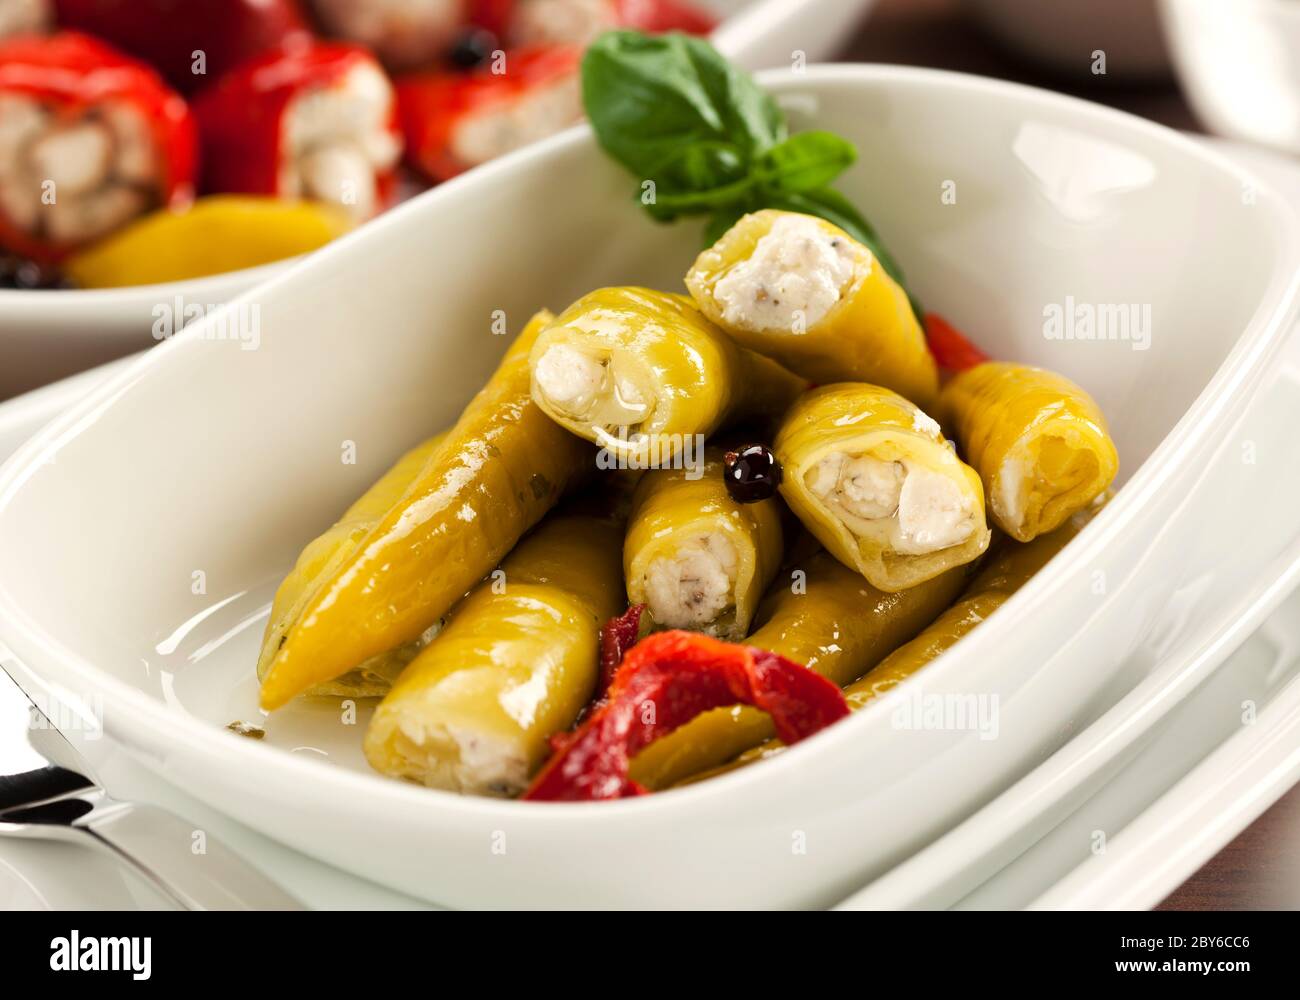 Antipasti, italian cuisine: closeup of green pepperoncini filled with a cream of goat cheese and herbs Stock Photo